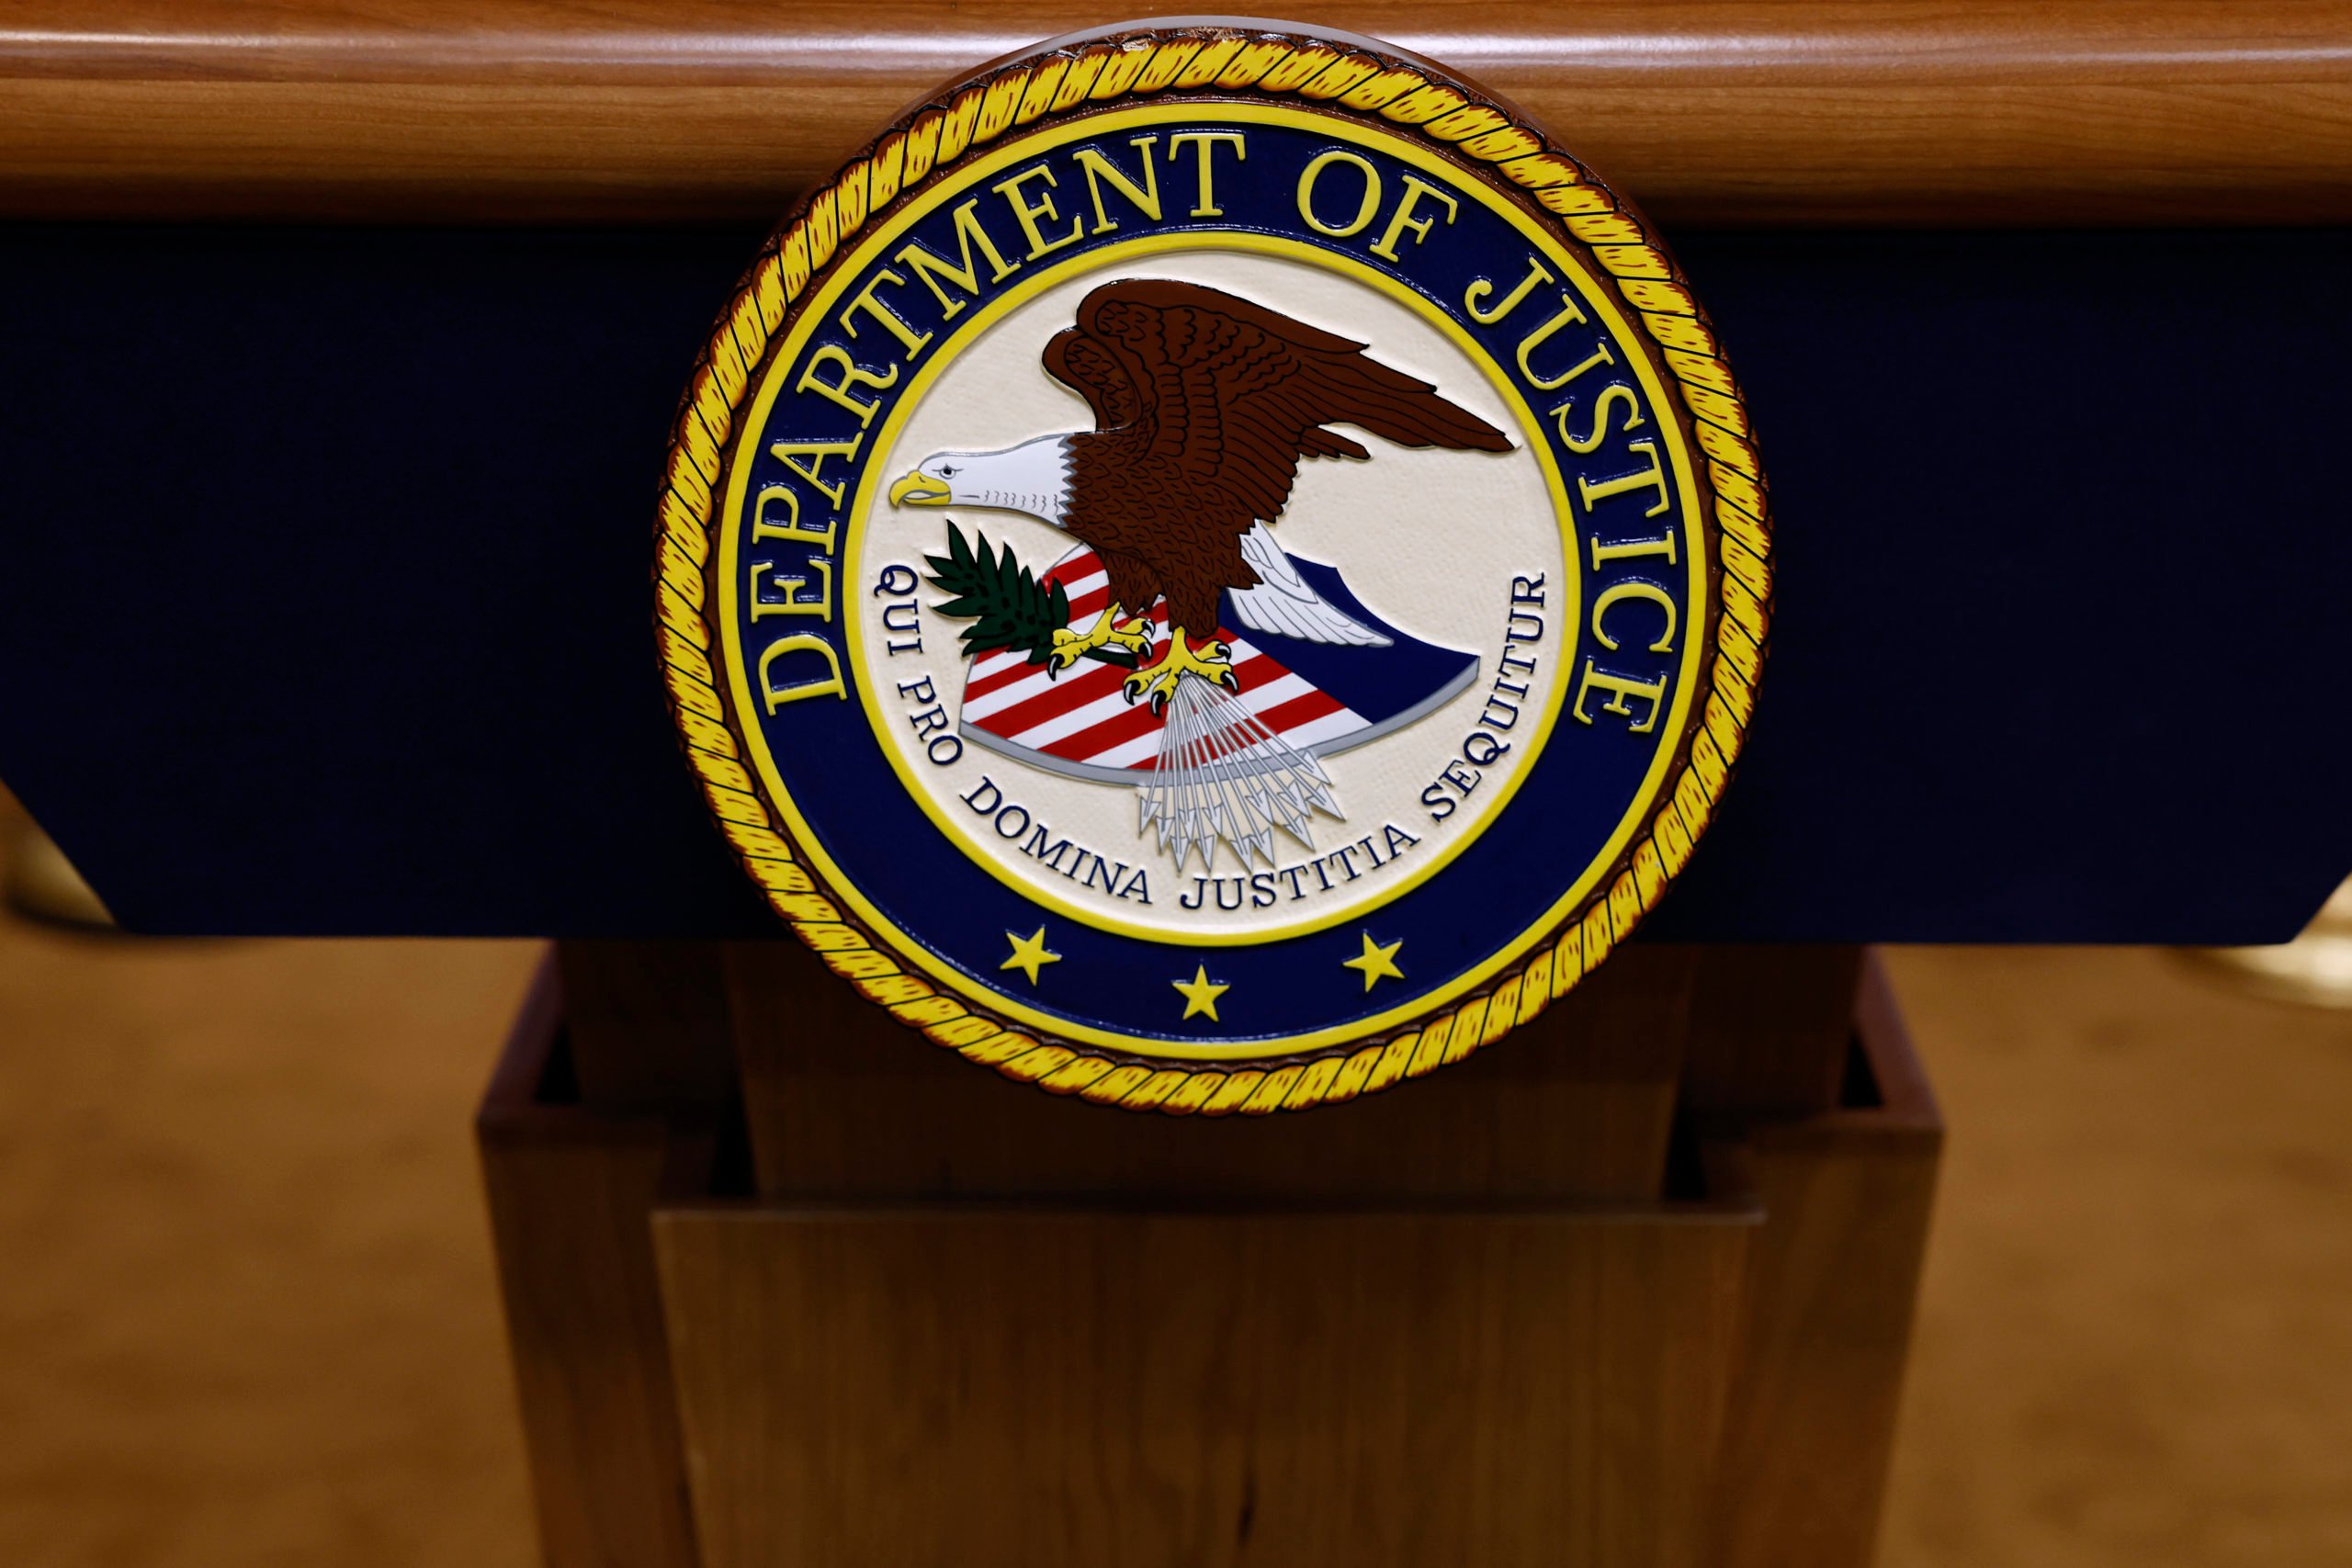 WASHINGTON, DC - MARCH 21: A seal for the Department of Justice is seen on a podium ahead of a news conference with U.S. Attorney General Merrick Garland at the Department of Justice Building on March 21, 2024 in Washington, DC. During the news conference, Garland and DOJ officials are expected to make an announcement about ongoing antitrust investigations. (Photo by Anna Moneymaker/Getty Images)